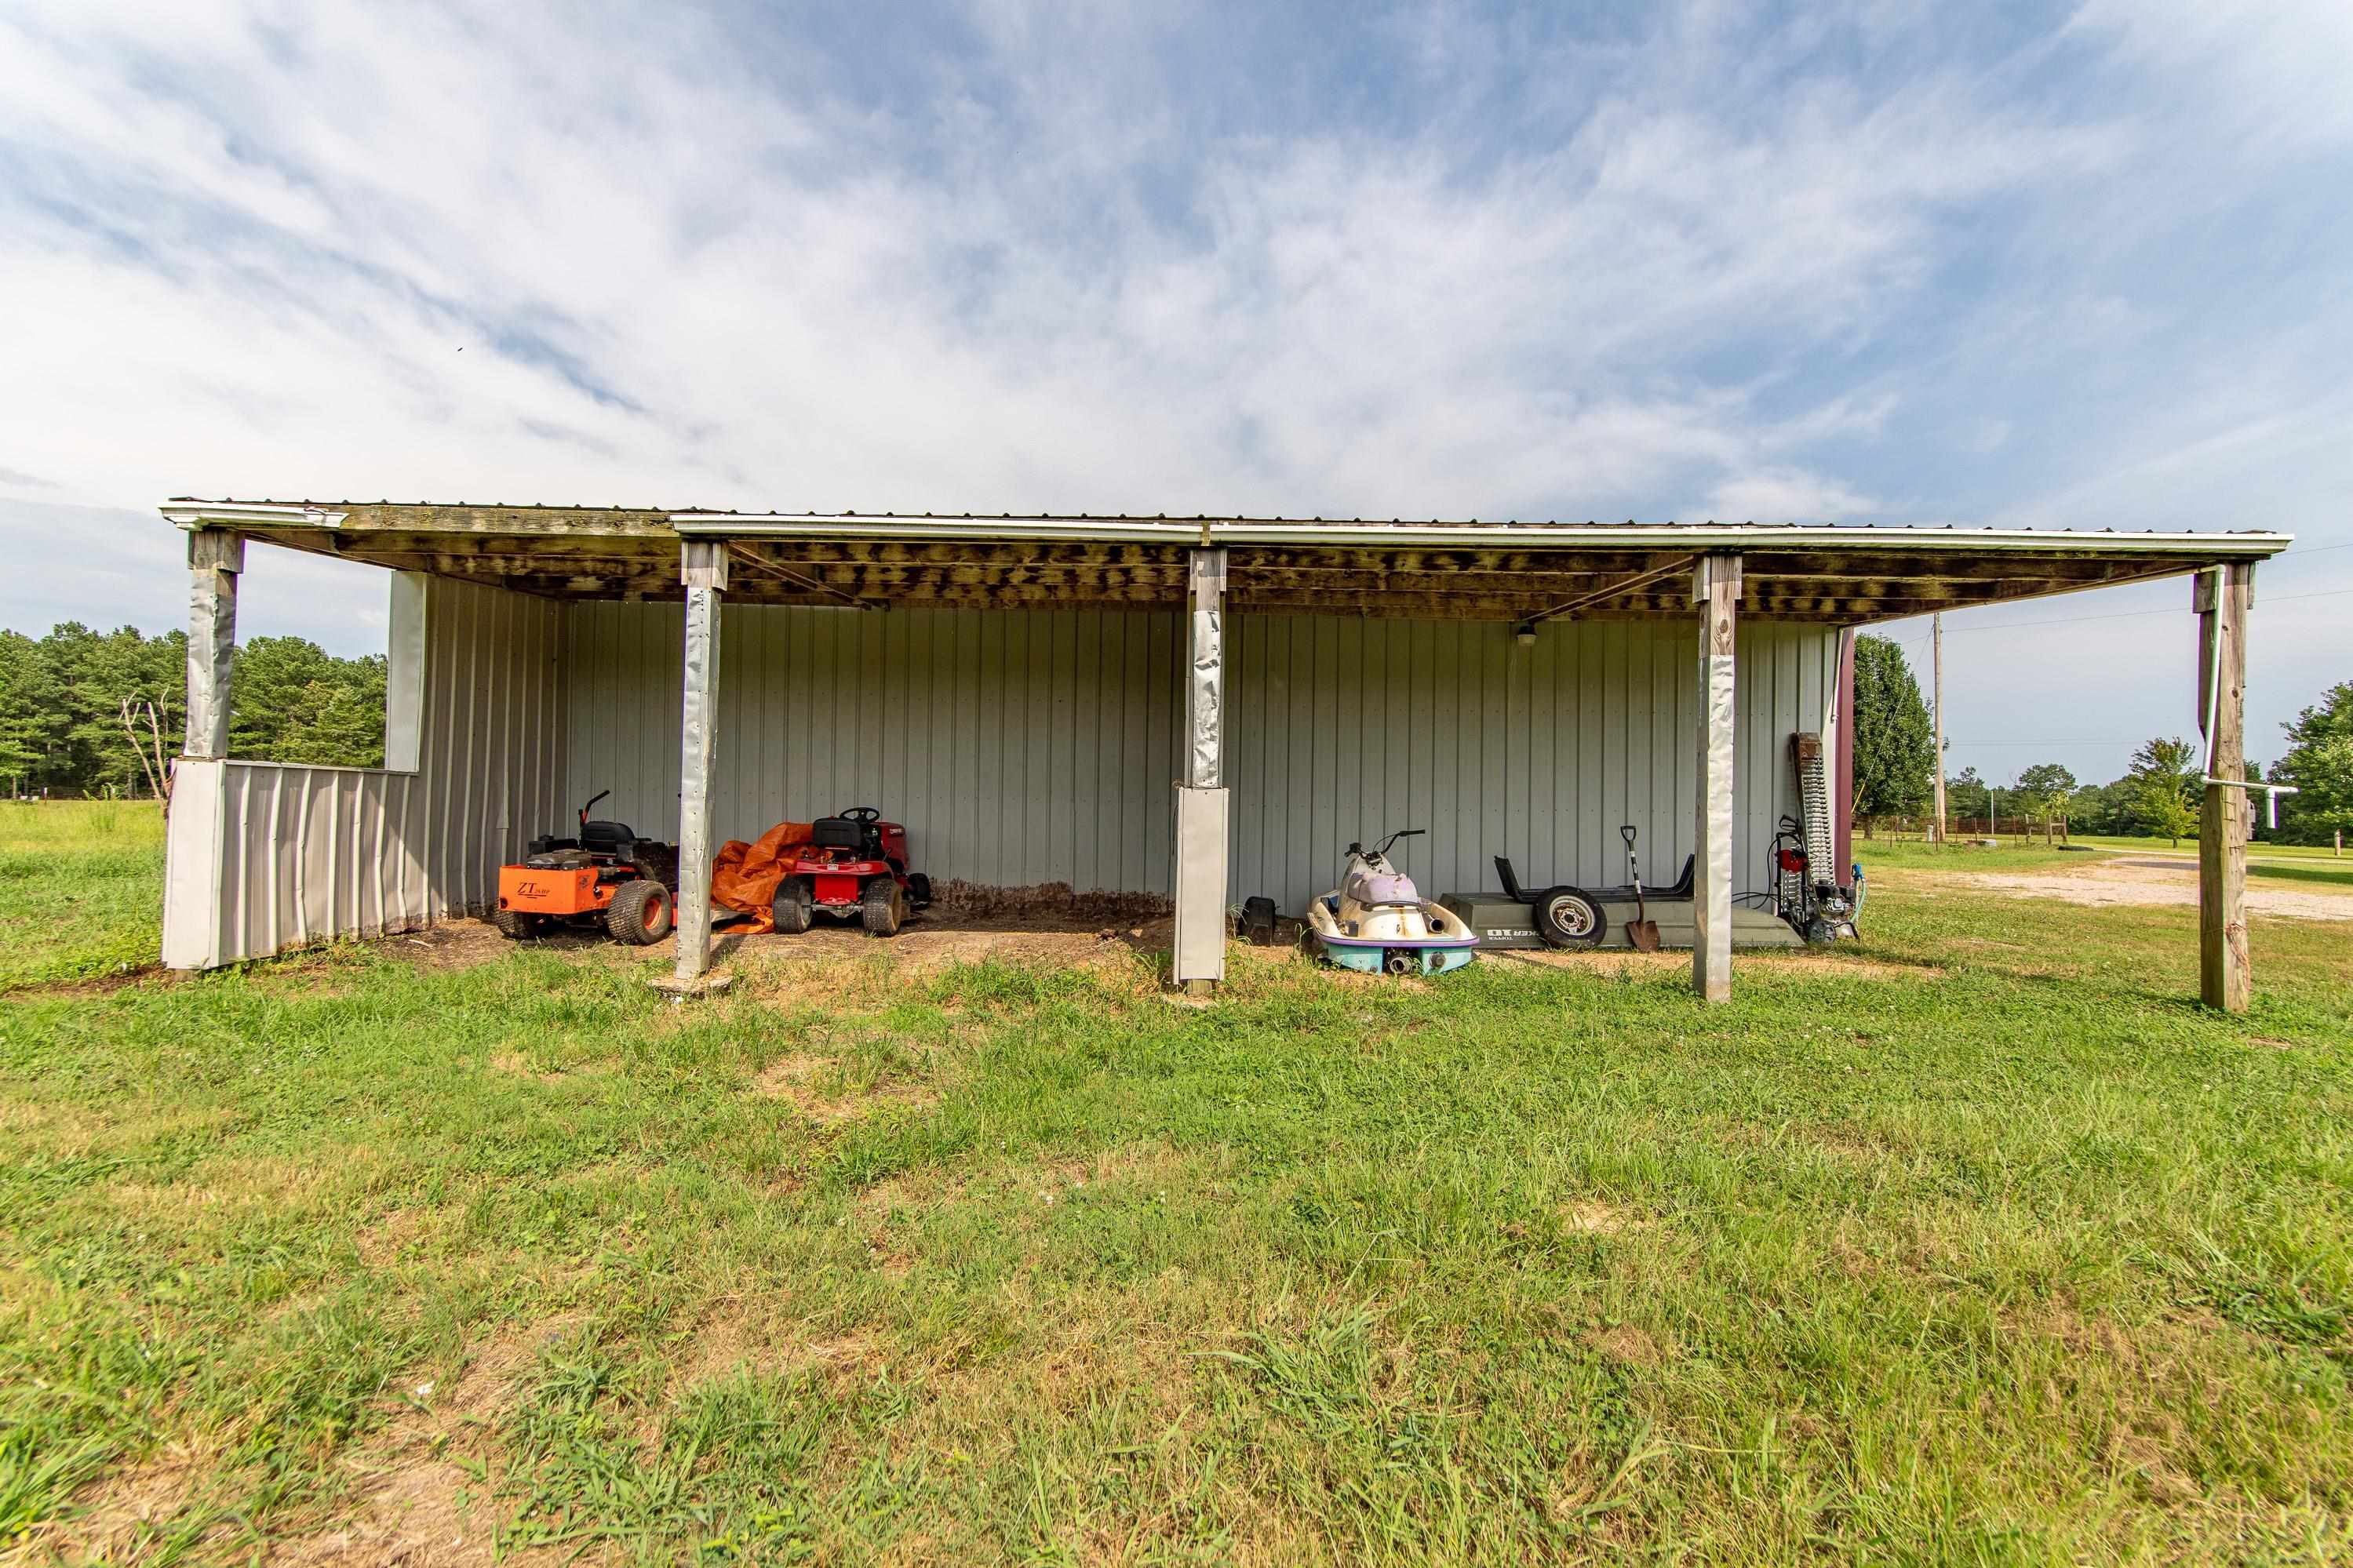 47 Nabors, Shiloh, Tennessee image 32